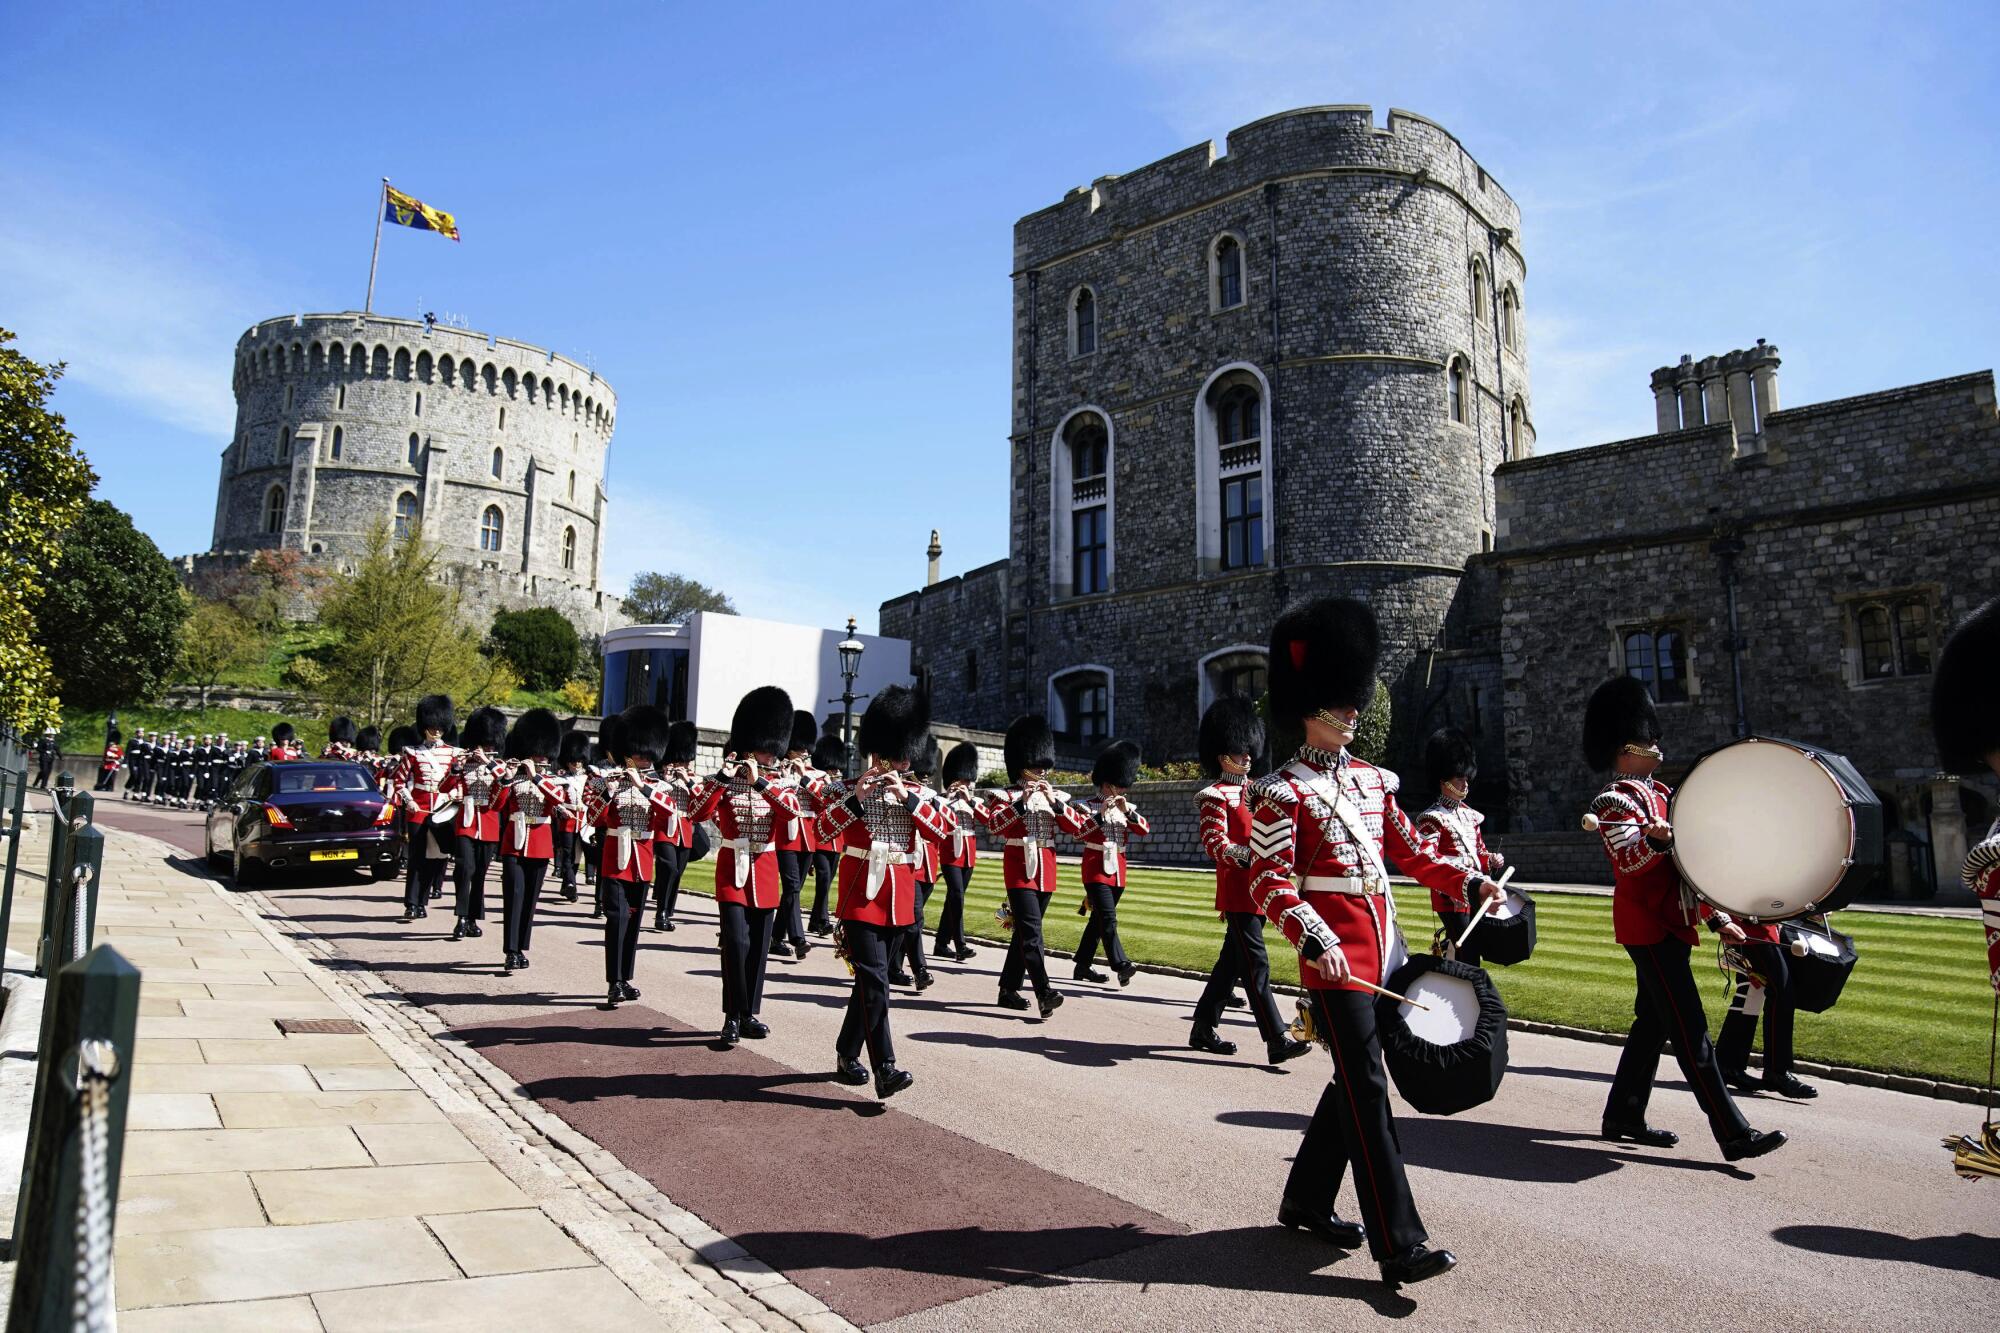 Members of the military march and play instruments outside Windsor Castle.